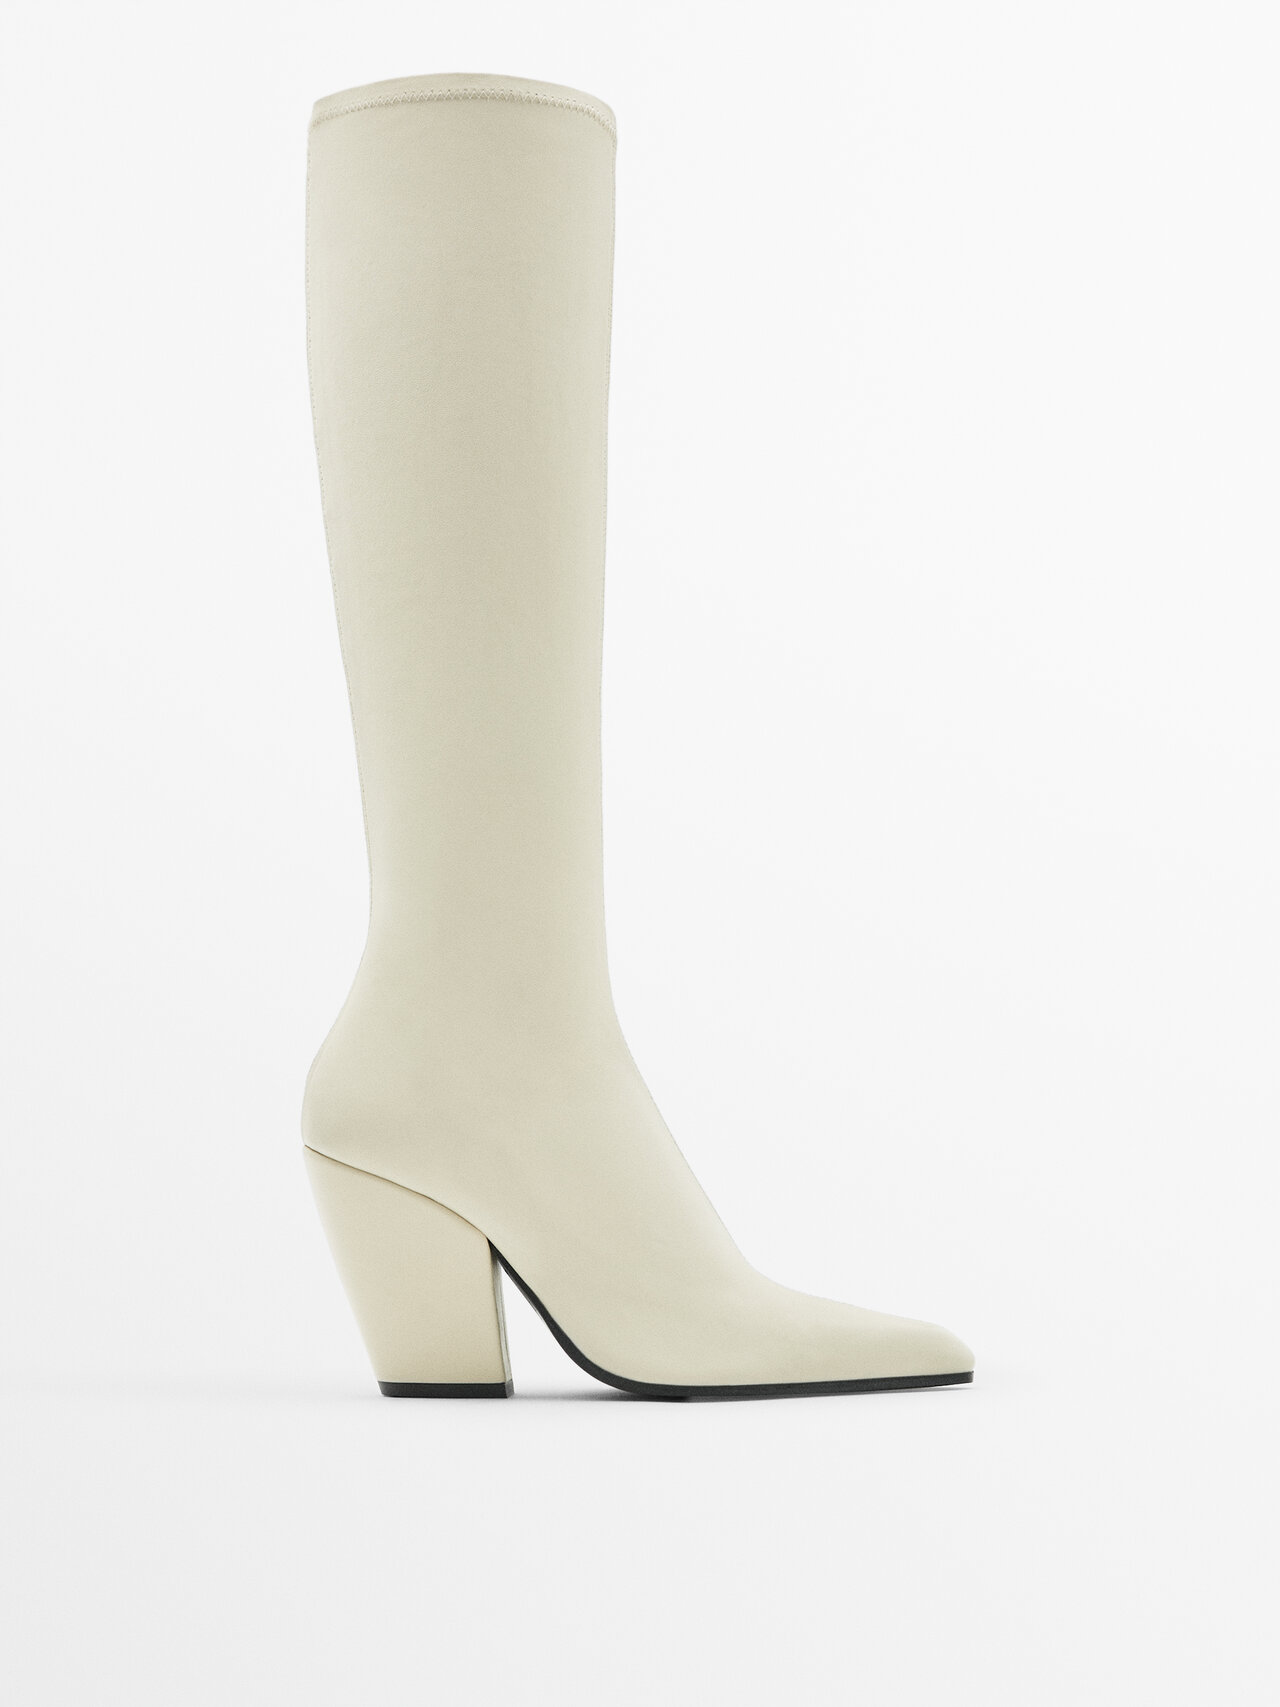 Massimo Dutti High-heel Leather Boots With Pointed Toe - Limited Edition In Cream